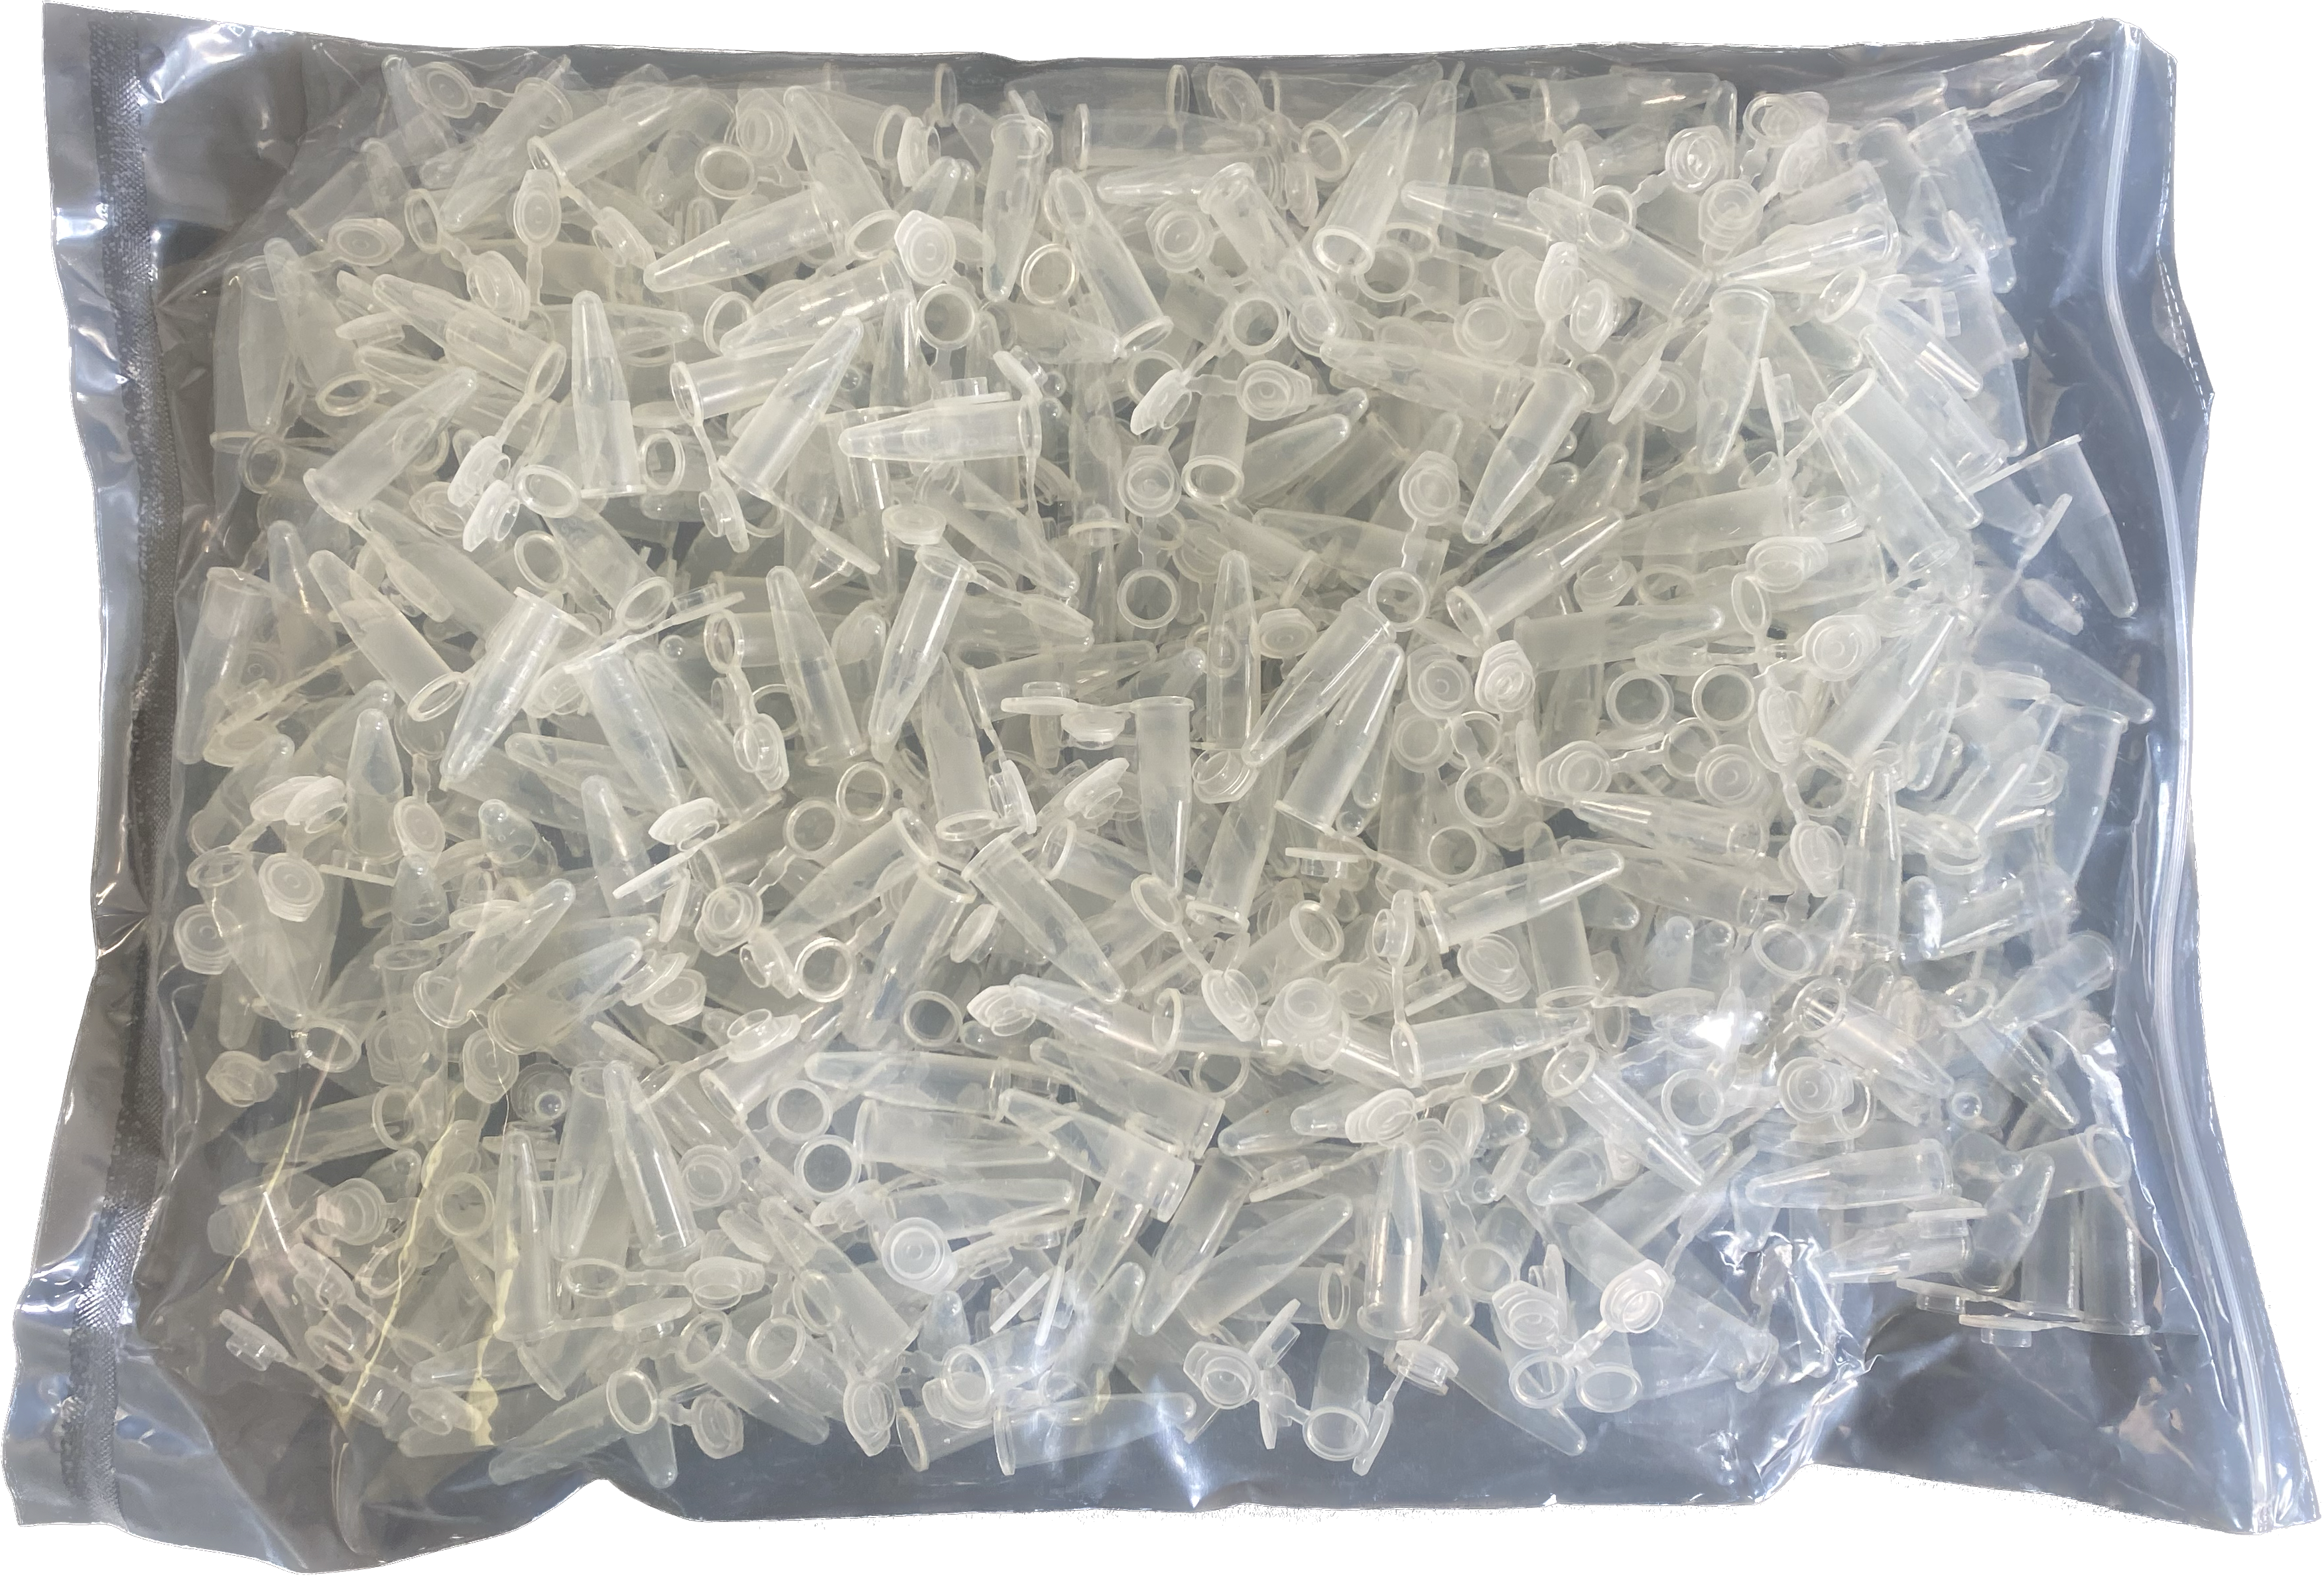 1.5 mL Microcentrifuge Tubes with Snap Cap (500 tubes)